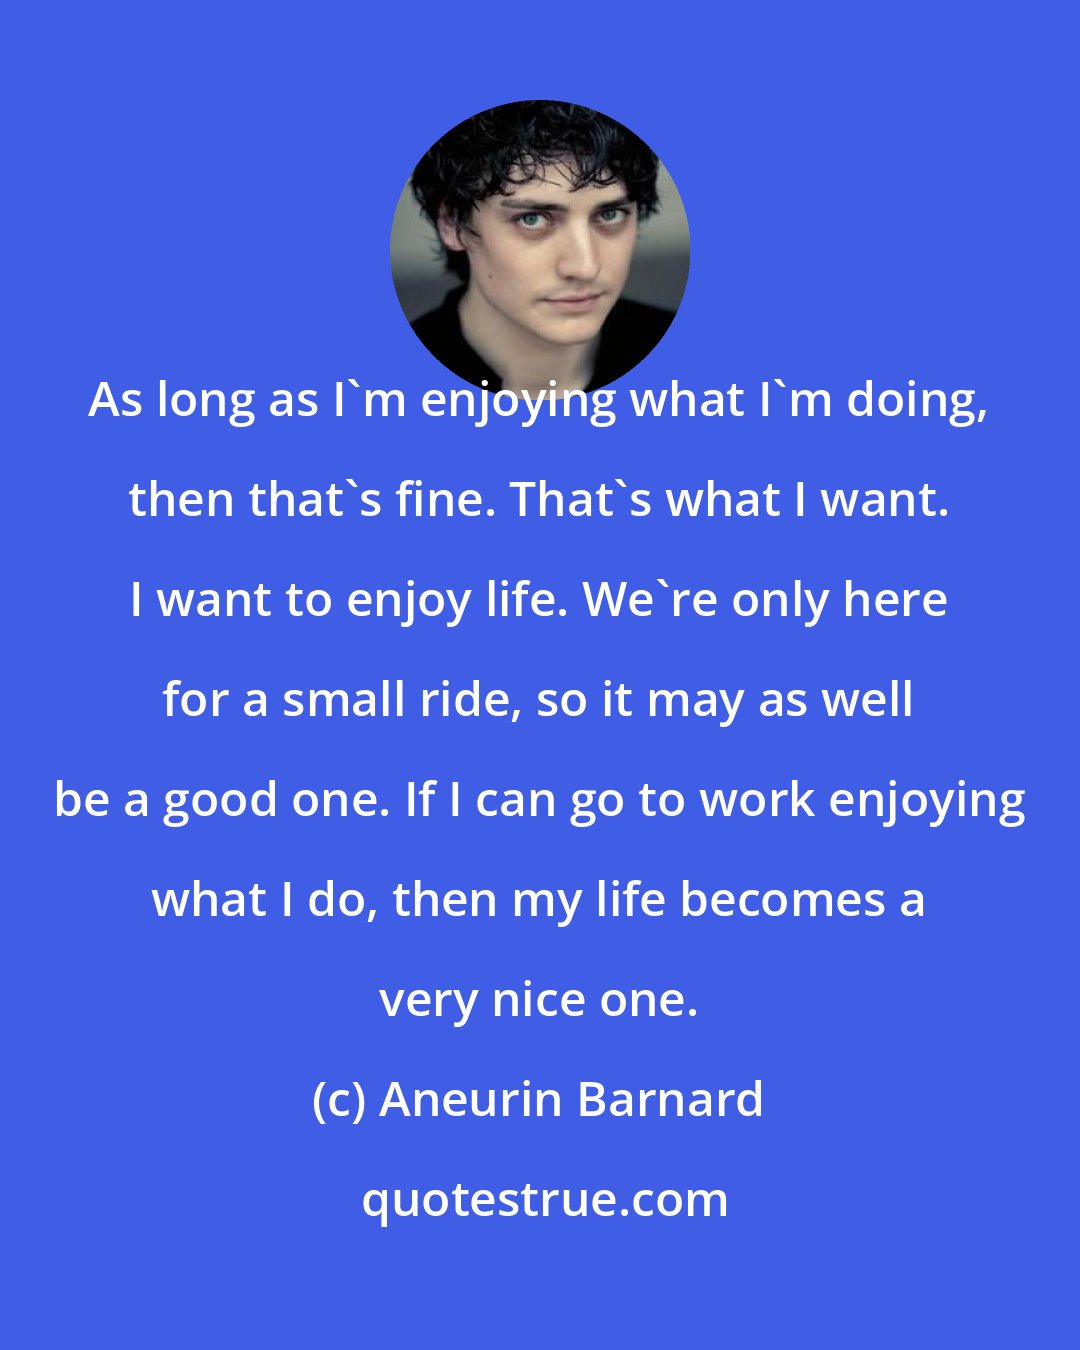 Aneurin Barnard: As long as I'm enjoying what I'm doing, then that's fine. That's what I want. I want to enjoy life. We're only here for a small ride, so it may as well be a good one. If I can go to work enjoying what I do, then my life becomes a very nice one.